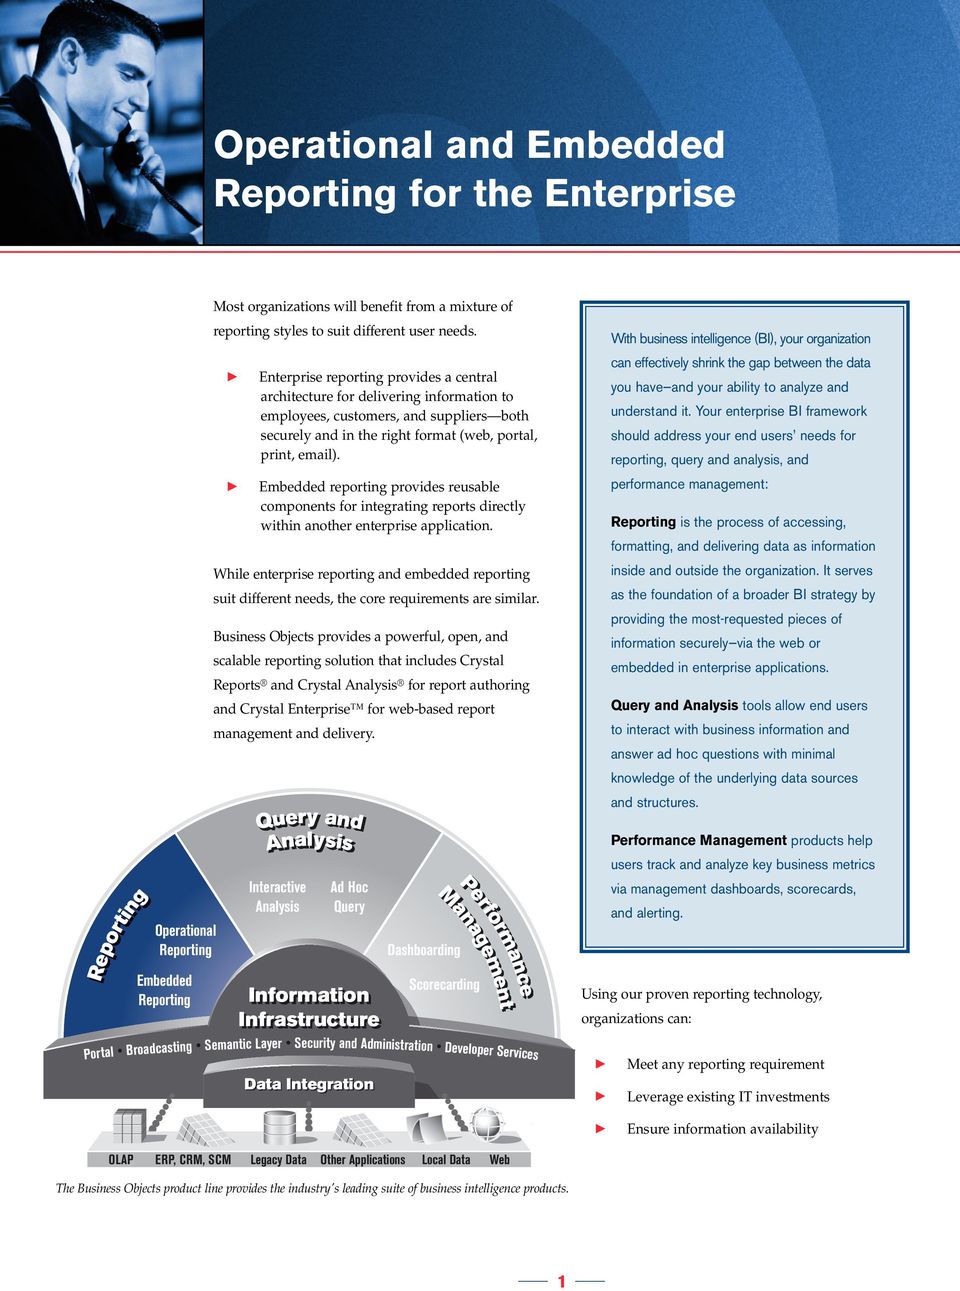 Embedded reporting provides reusable components for integrating reports directly within another enterprise application.